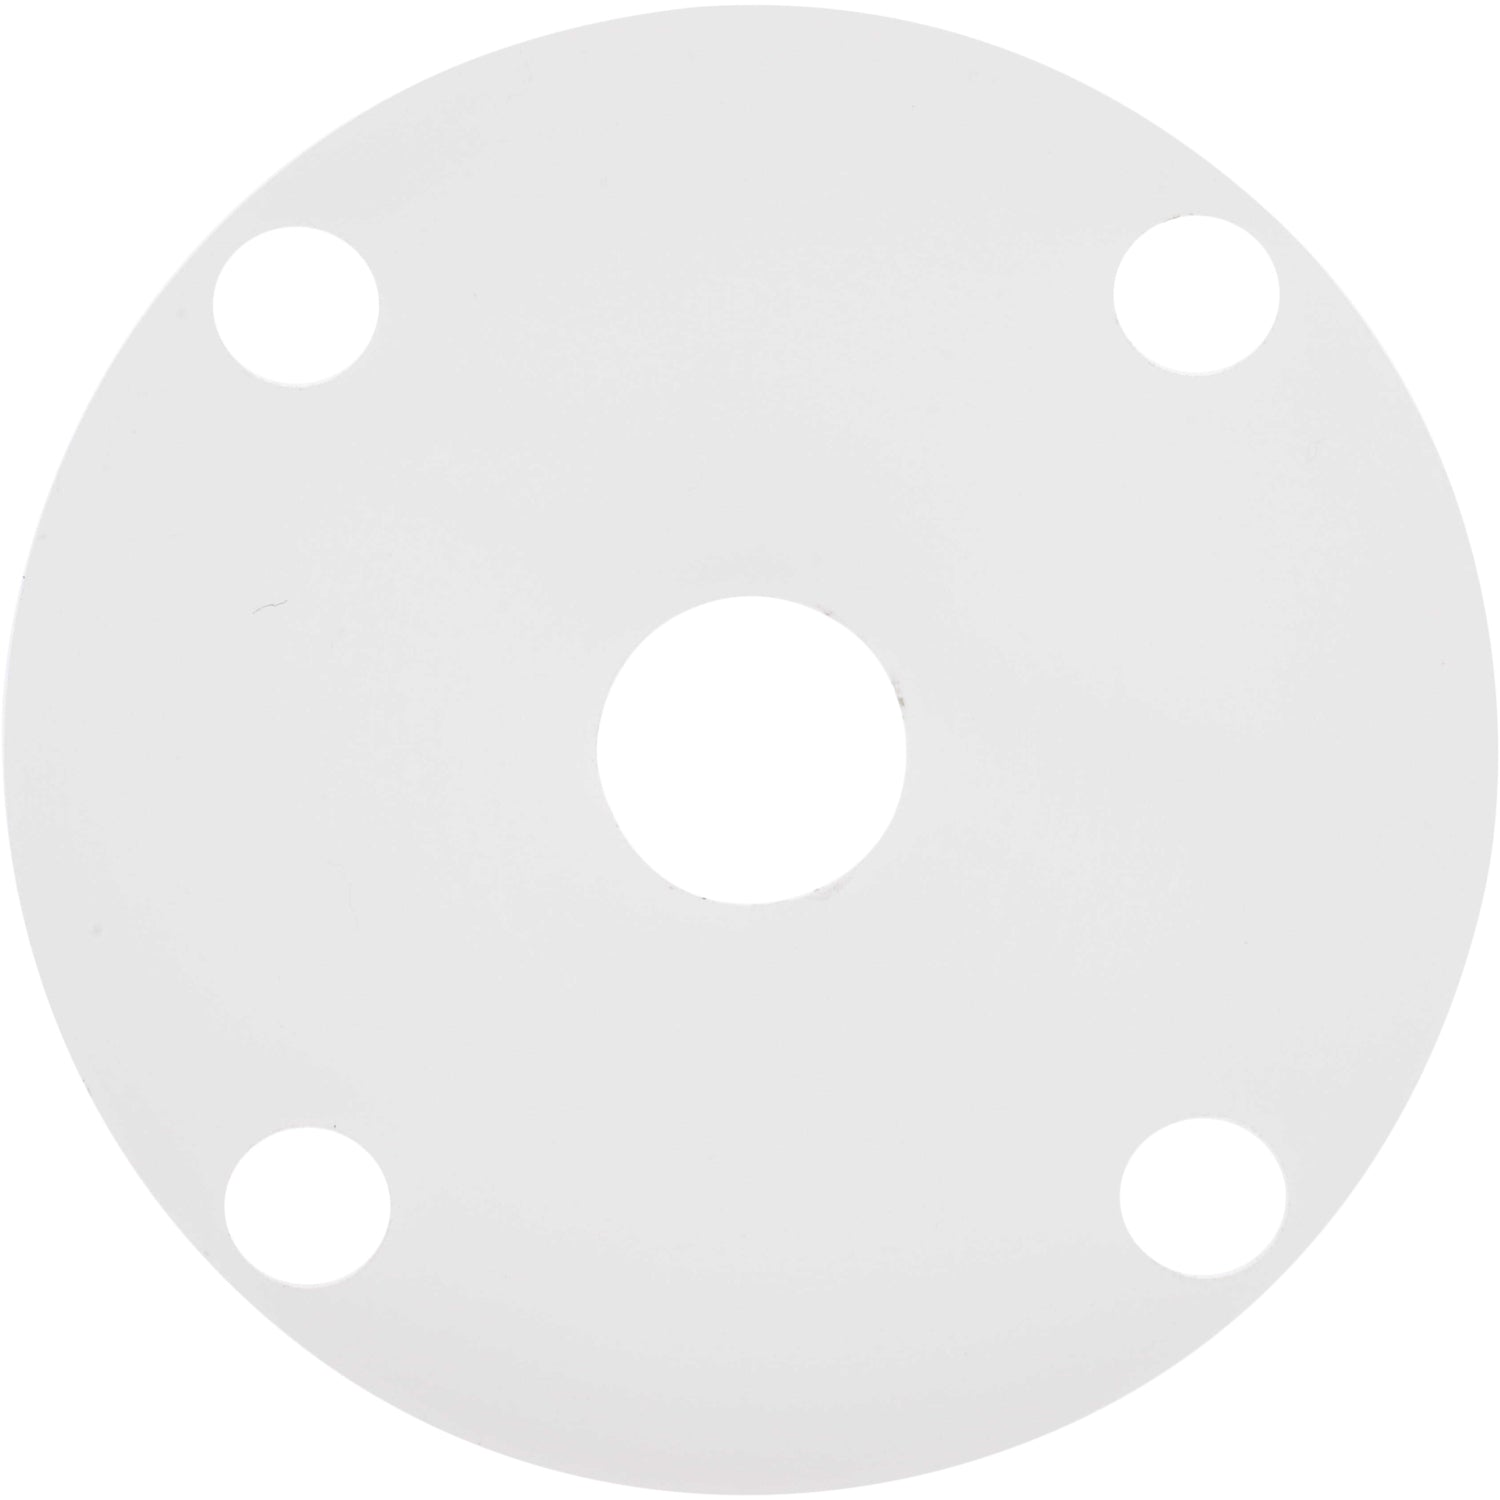 White plastic disk shaped part with four evenly spaced through holes on outer diameter and one larger through hole in the center of the part. Part shown on a white background. 